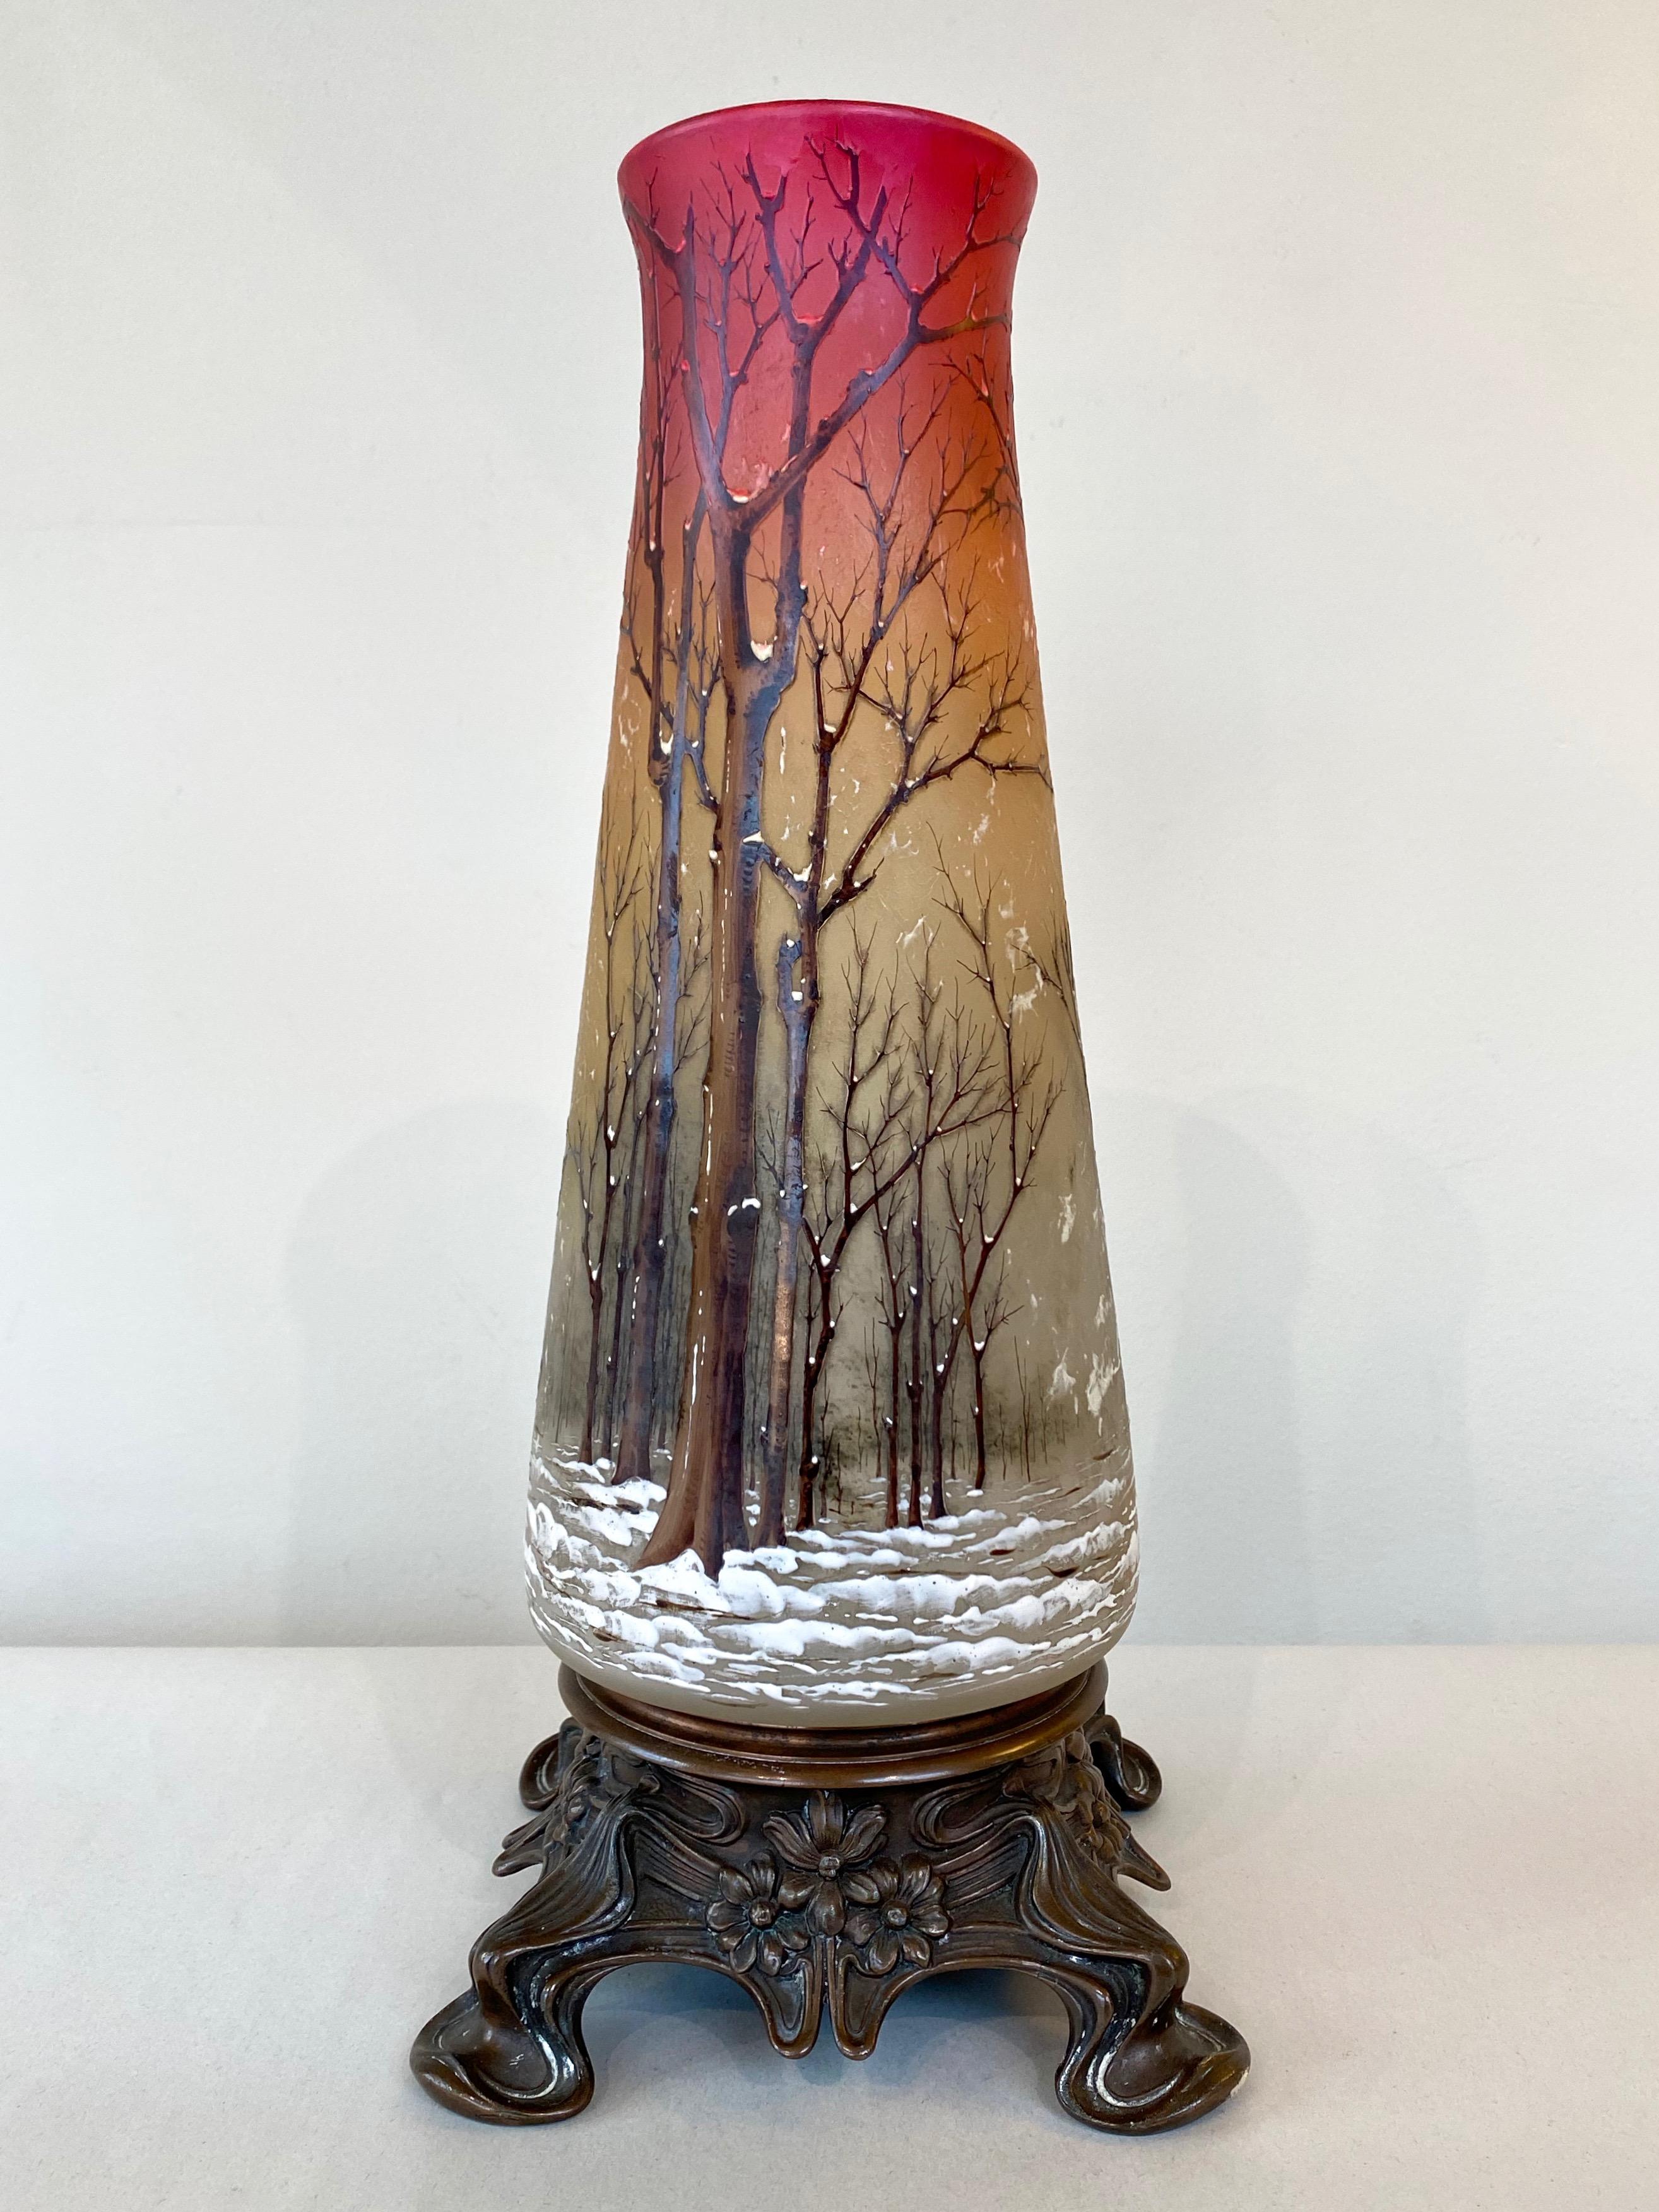 A very striking and uncommon circa 1900 Daum “Winter Landscape Scene” enameled cameo glass vase or lamp body on elegant Art Nouveau bronze base. Coloration, form, and base unlike any other Daum Nancy piece with the same motif of which we’re aware,